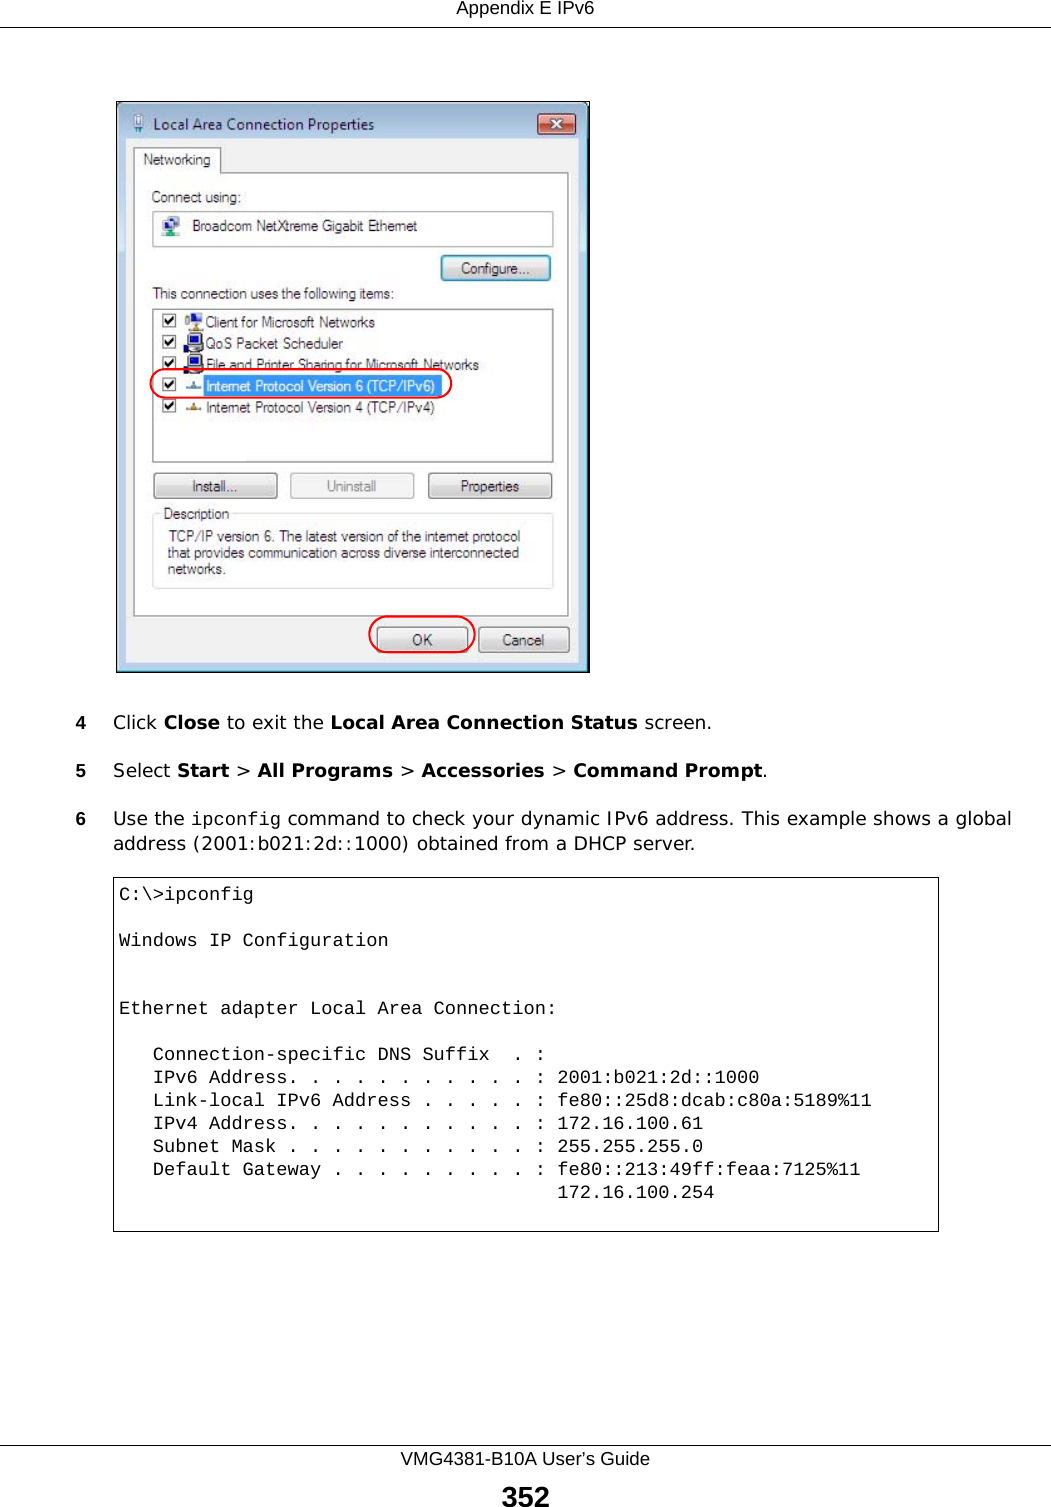 Appendix E IPv6VMG4381-B10A User’s Guide3524Click Close to exit the Local Area Connection Status screen.5Select Start &gt; All Programs &gt; Accessories &gt; Command Prompt.6Use the ipconfig command to check your dynamic IPv6 address. This example shows a global address (2001:b021:2d::1000) obtained from a DHCP server.C:\&gt;ipconfigWindows IP ConfigurationEthernet adapter Local Area Connection:   Connection-specific DNS Suffix  . :    IPv6 Address. . . . . . . . . . . : 2001:b021:2d::1000   Link-local IPv6 Address . . . . . : fe80::25d8:dcab:c80a:5189%11   IPv4 Address. . . . . . . . . . . : 172.16.100.61   Subnet Mask . . . . . . . . . . . : 255.255.255.0   Default Gateway . . . . . . . . . : fe80::213:49ff:feaa:7125%11                                       172.16.100.254